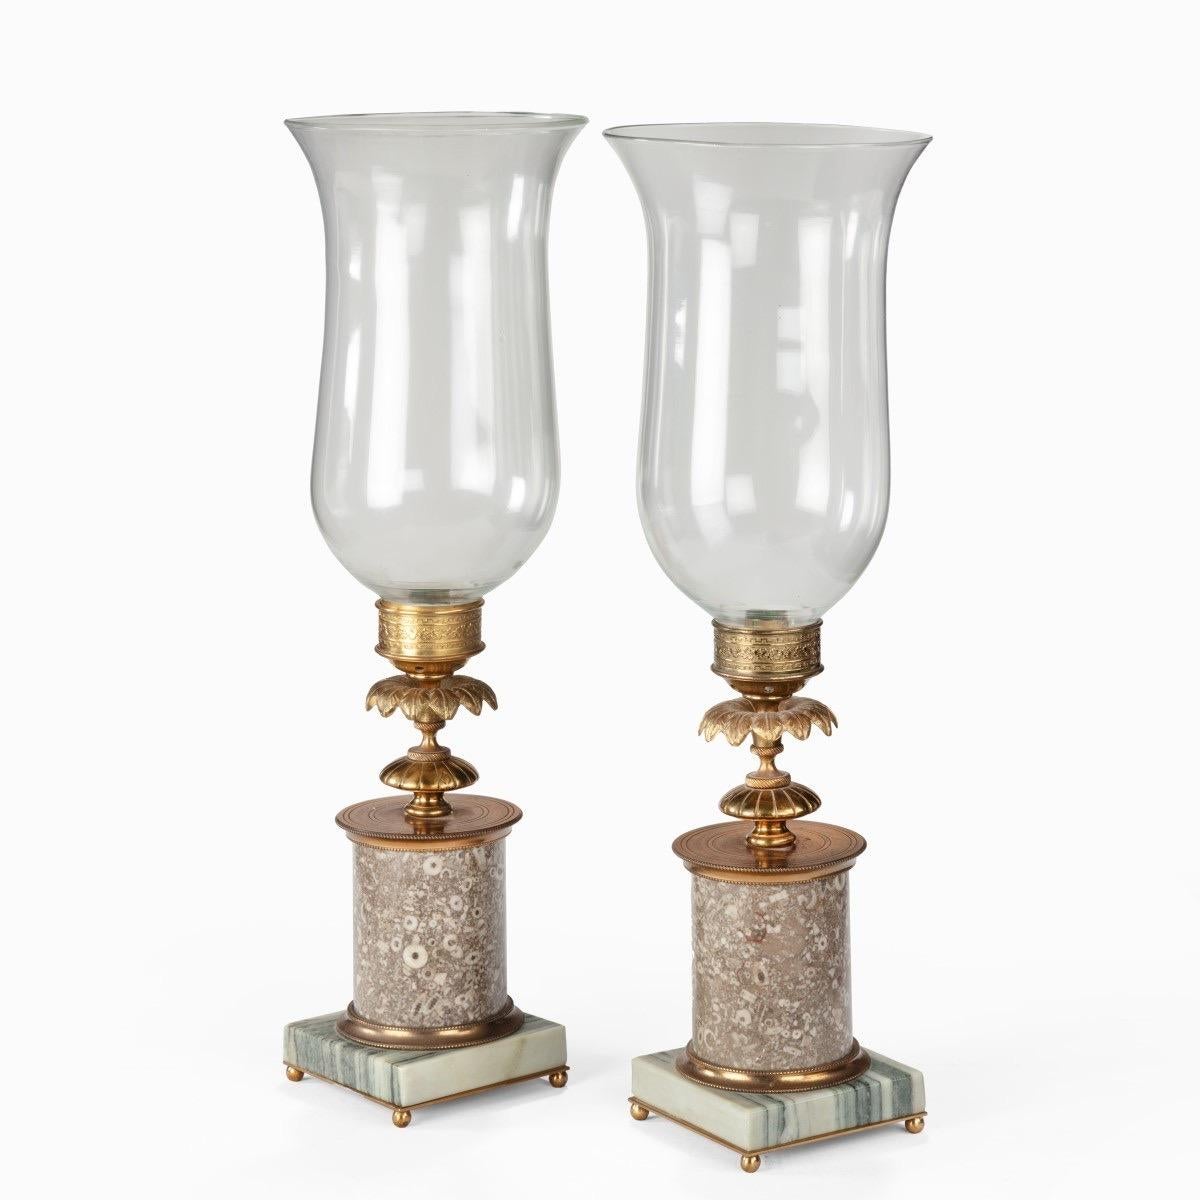 19th Century A pair of decorative storm lamps